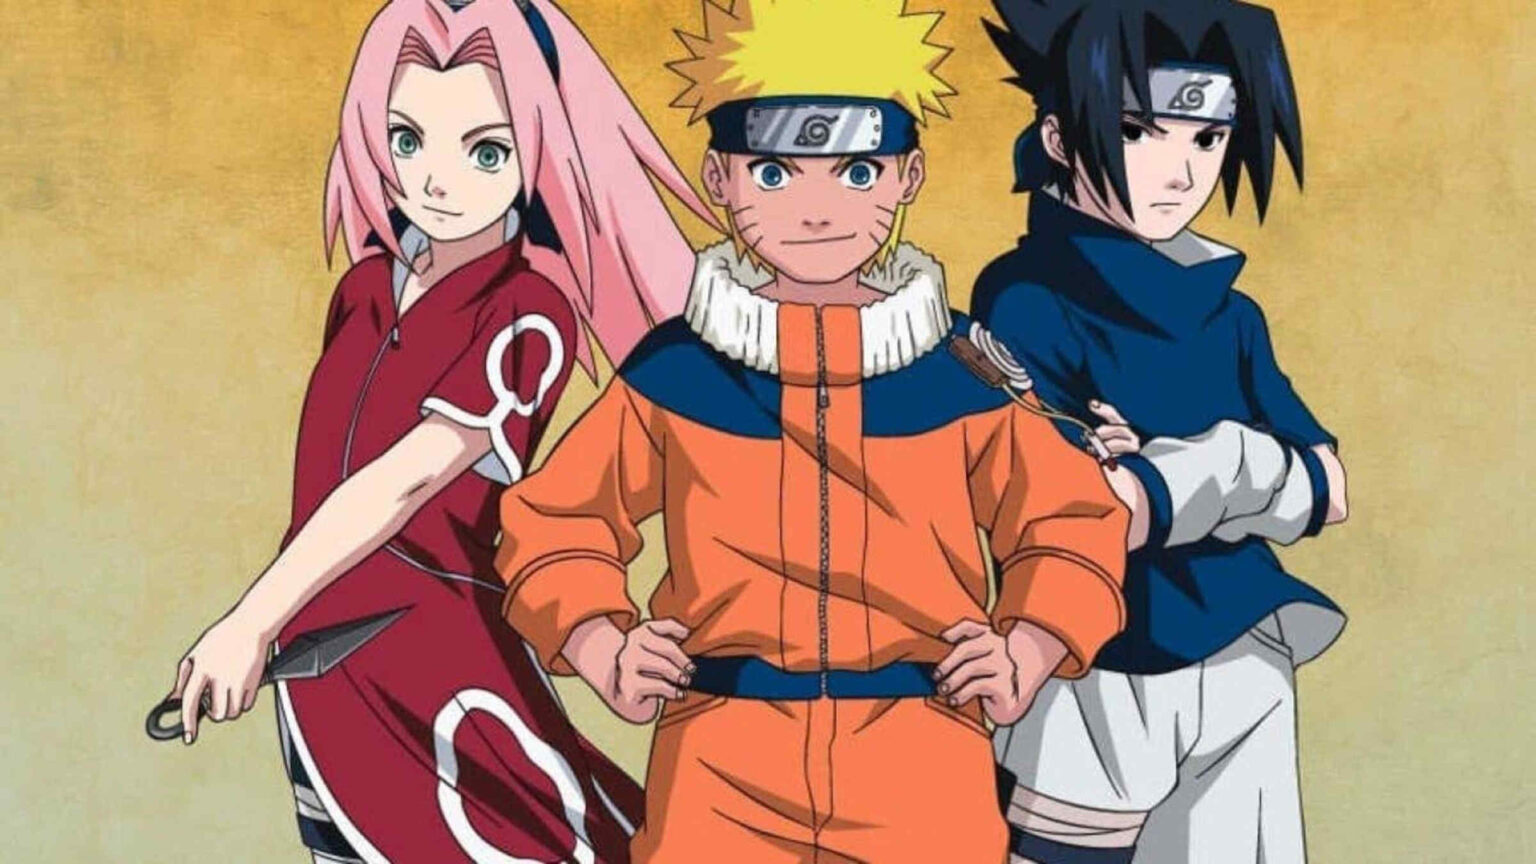 Looking for a fun manga series to enjoy with friends? Get into the action with everyone's favorite hero when you watch 'Naruto' free online!